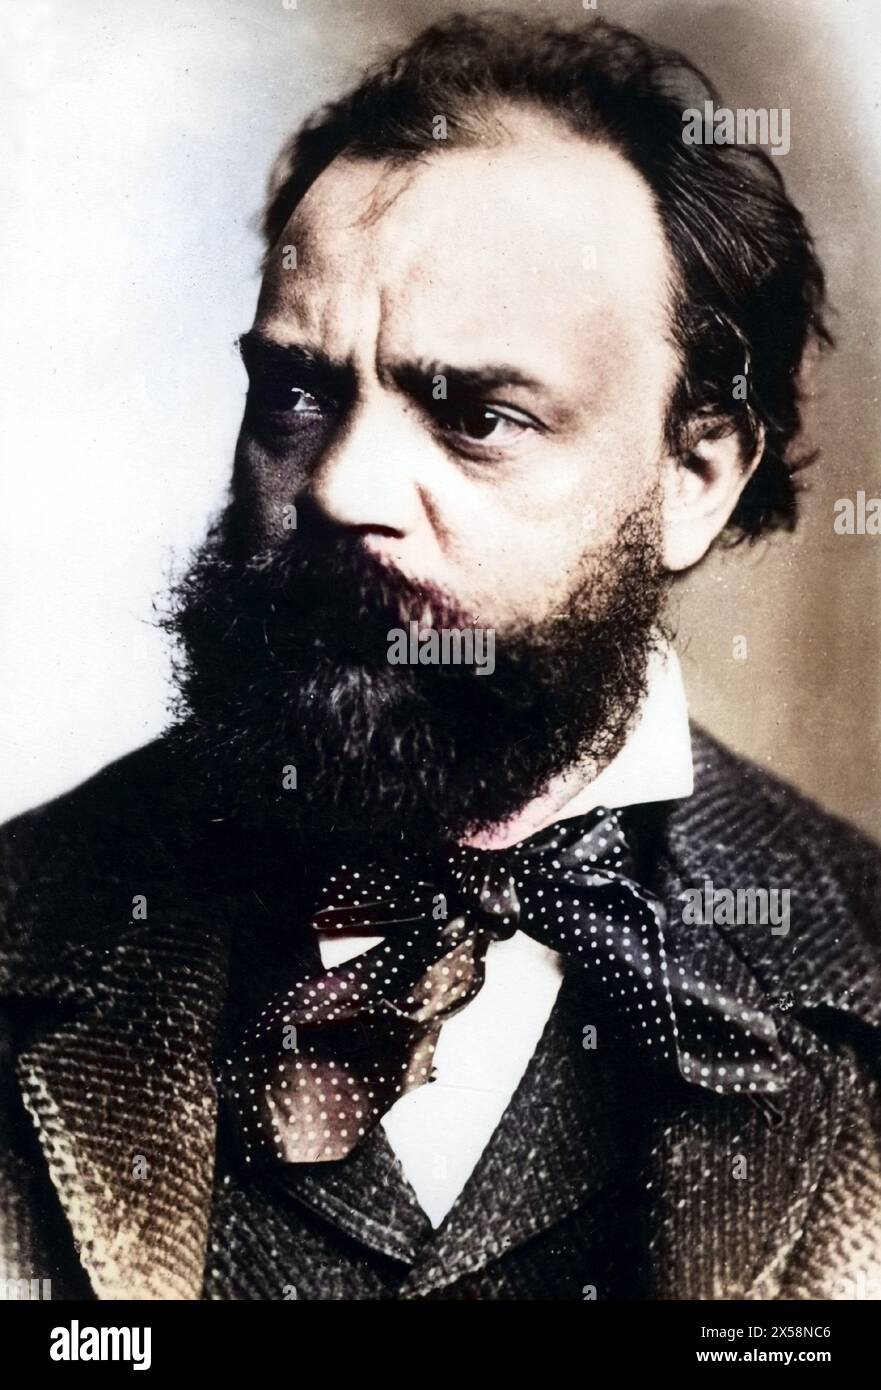 Dvorak, Antonin, 8.9.1841 - 1.5.1904, Czech composer, portrait, ADDITIONAL-RIGHTS-CLEARANCE-INFO-NOT-AVAILABLE Stock Photo